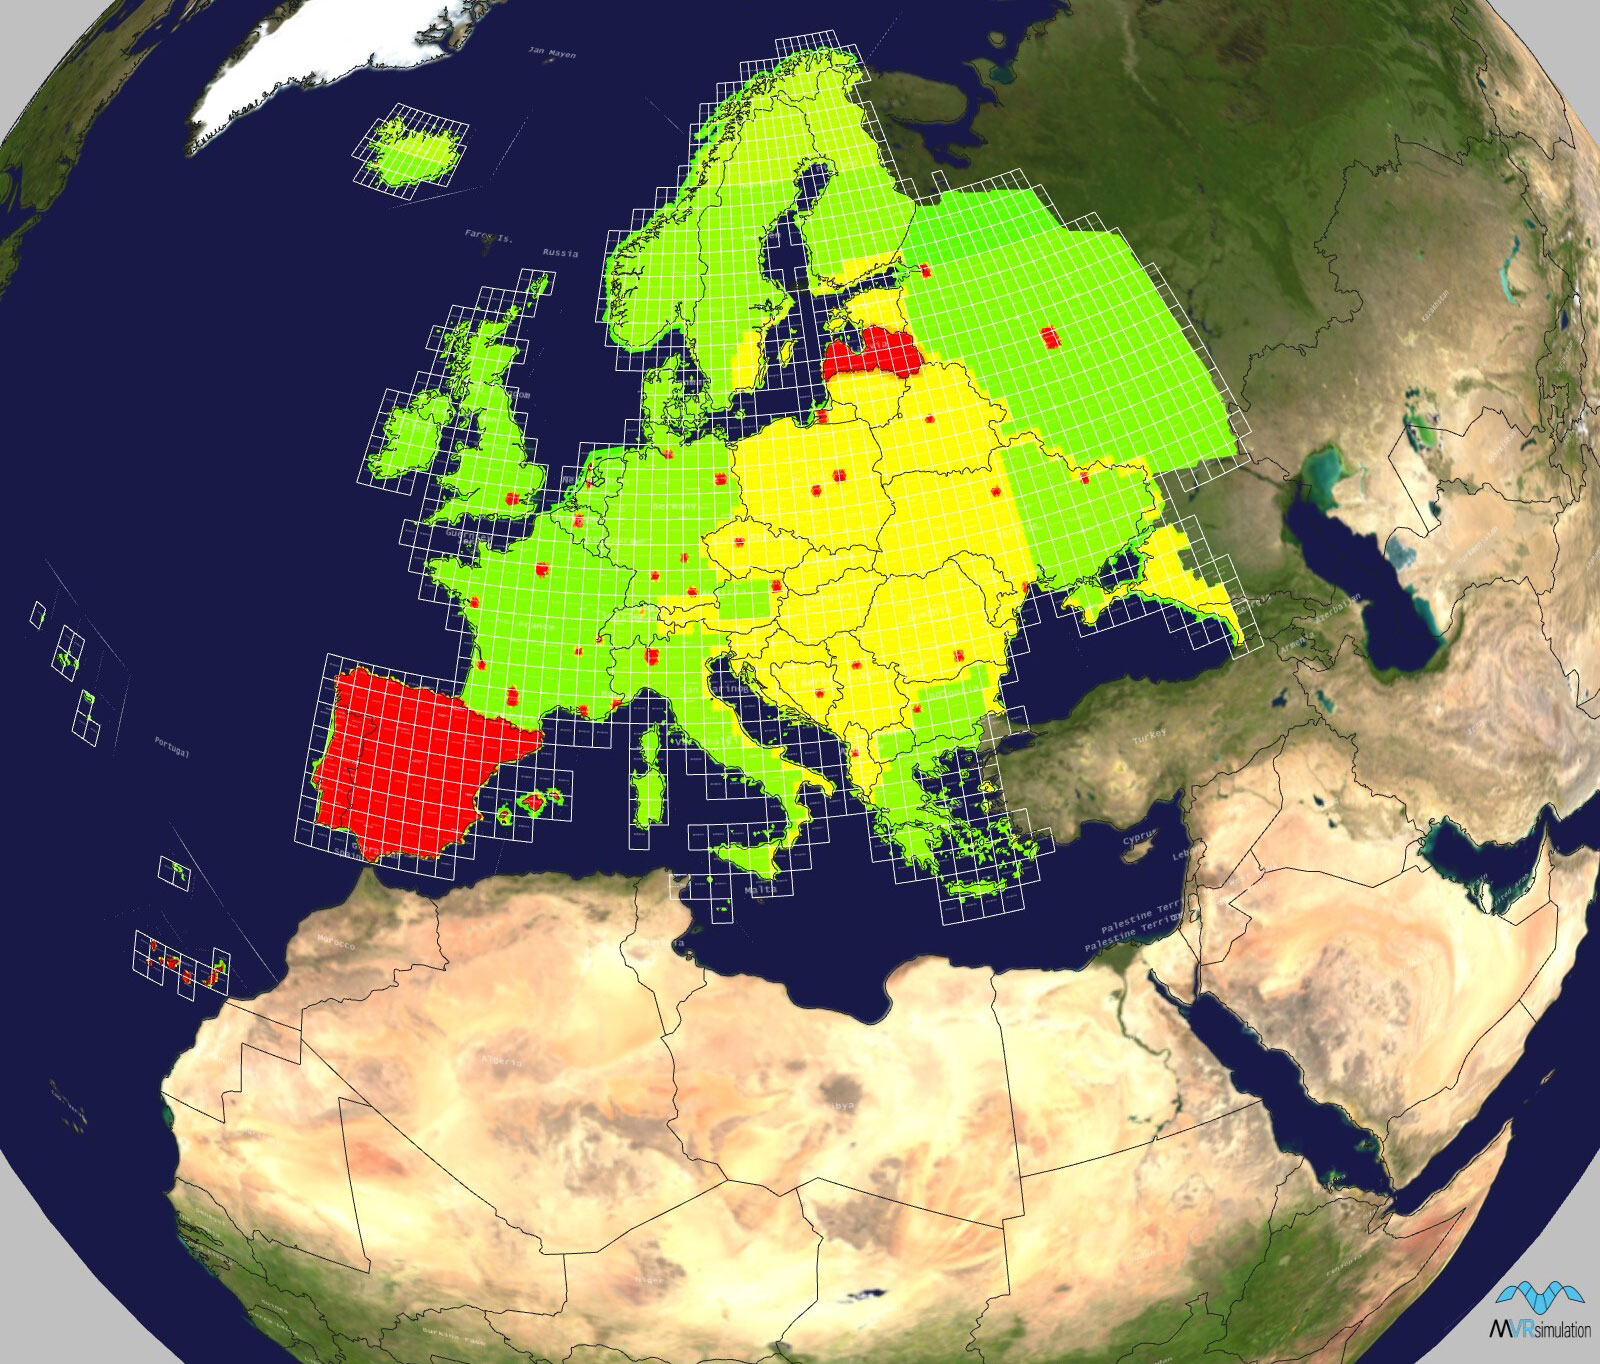 MVRsimulation coverage map of Europe 3D terrain.